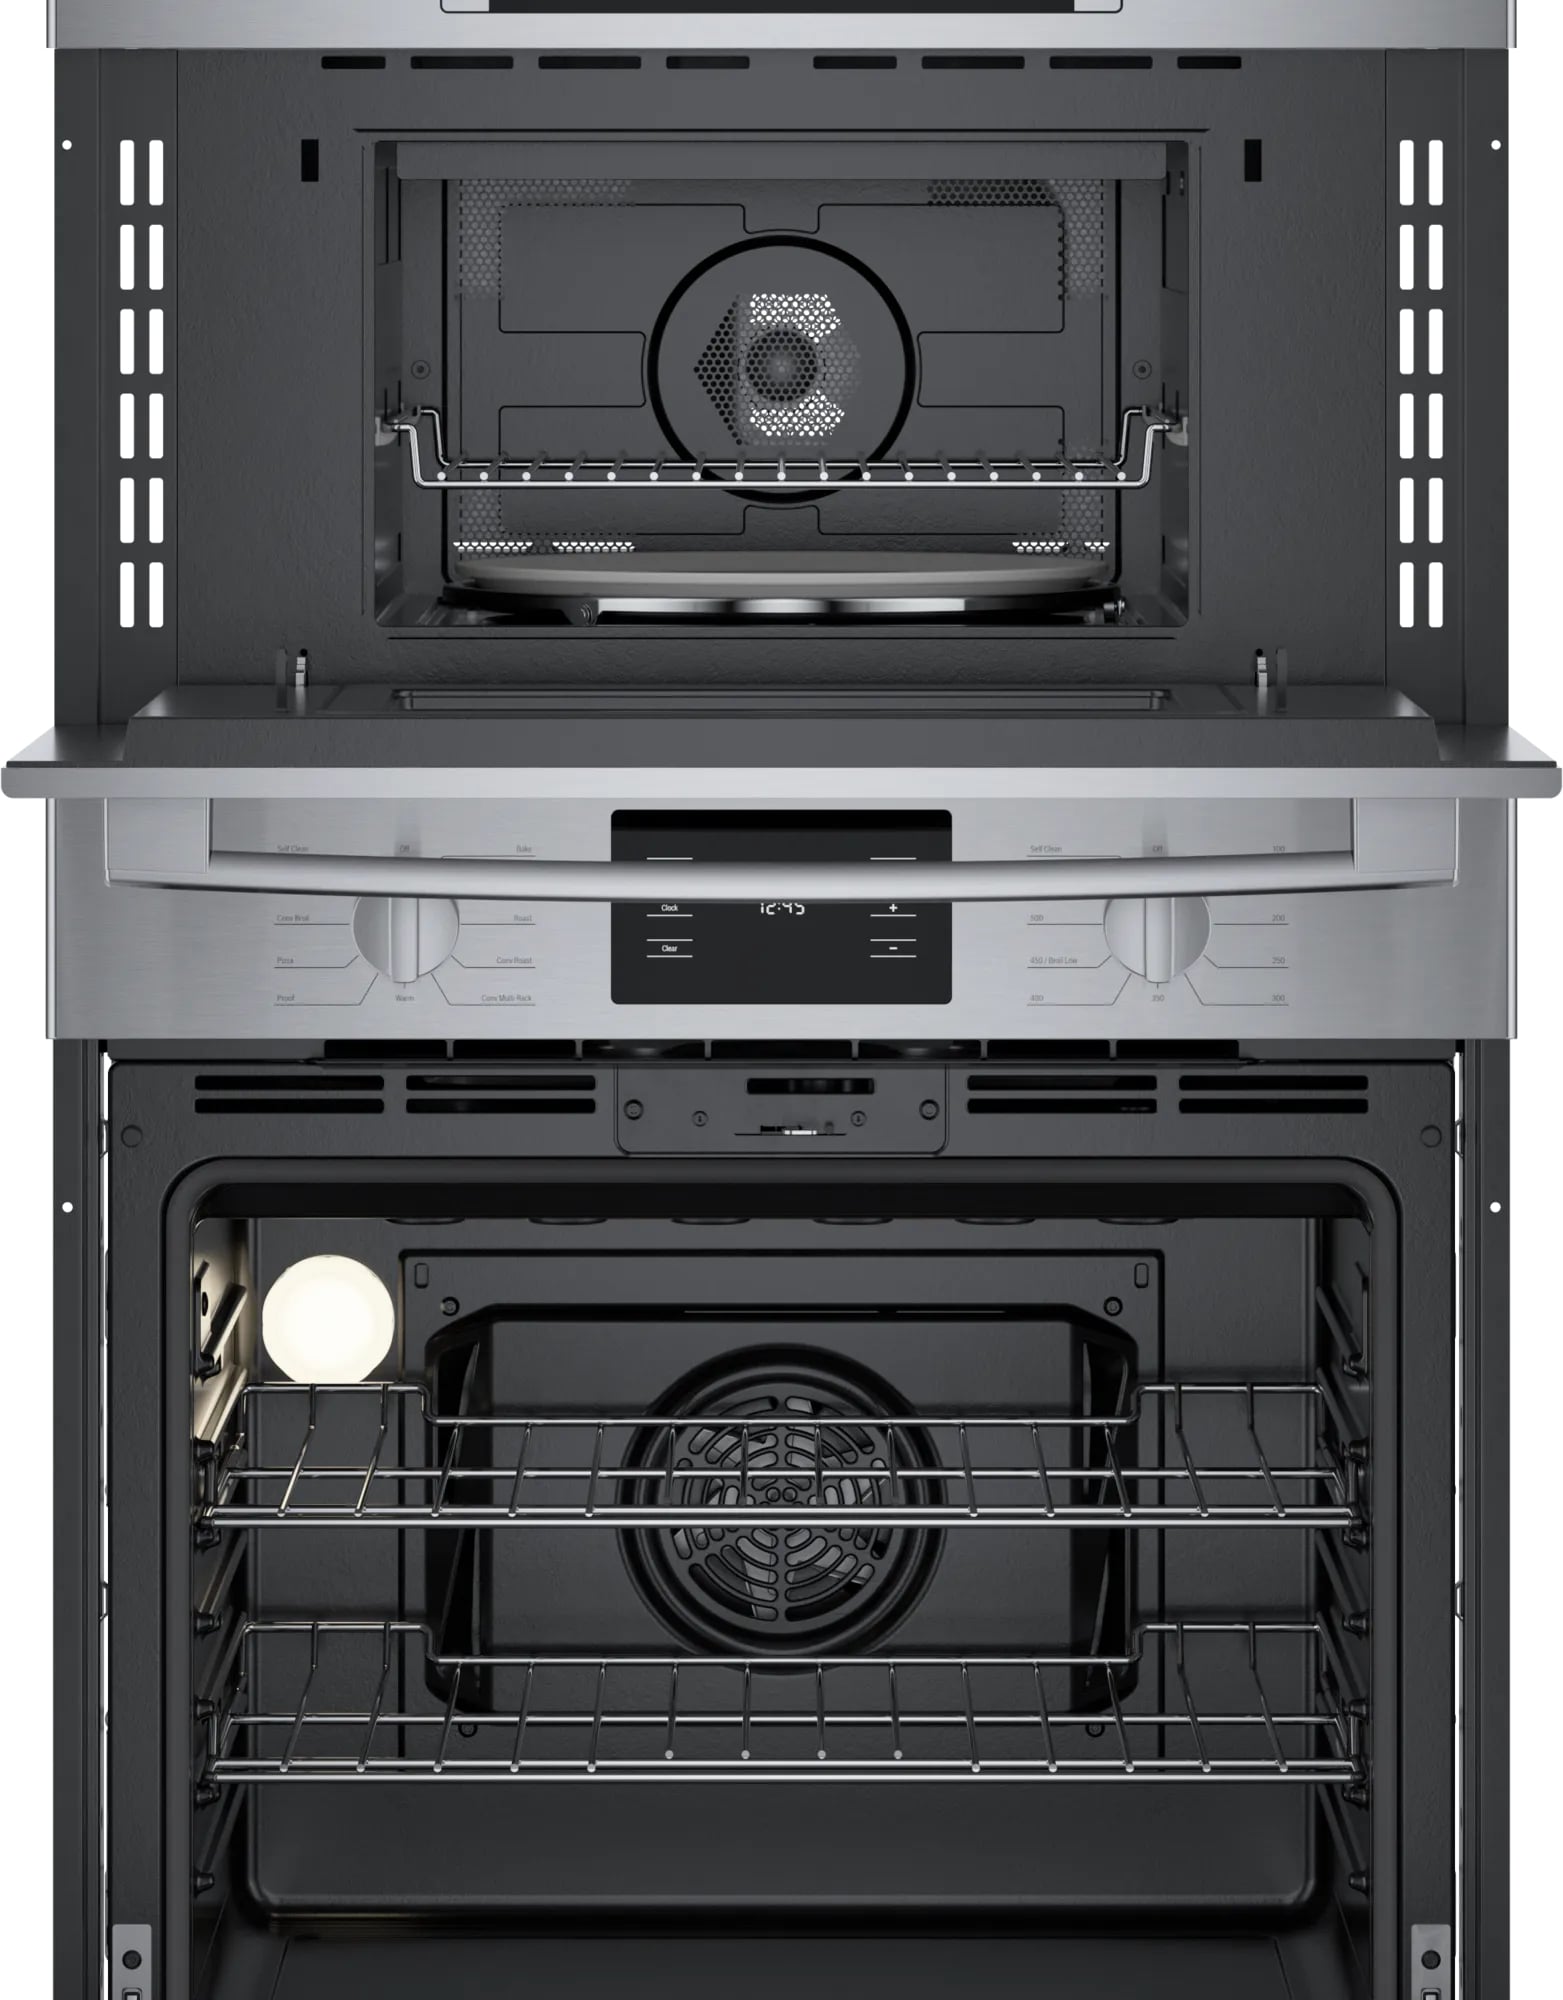 Bosch - 6.2 cu. ft Combination Wall Oven in Stainless - HBL5754UC